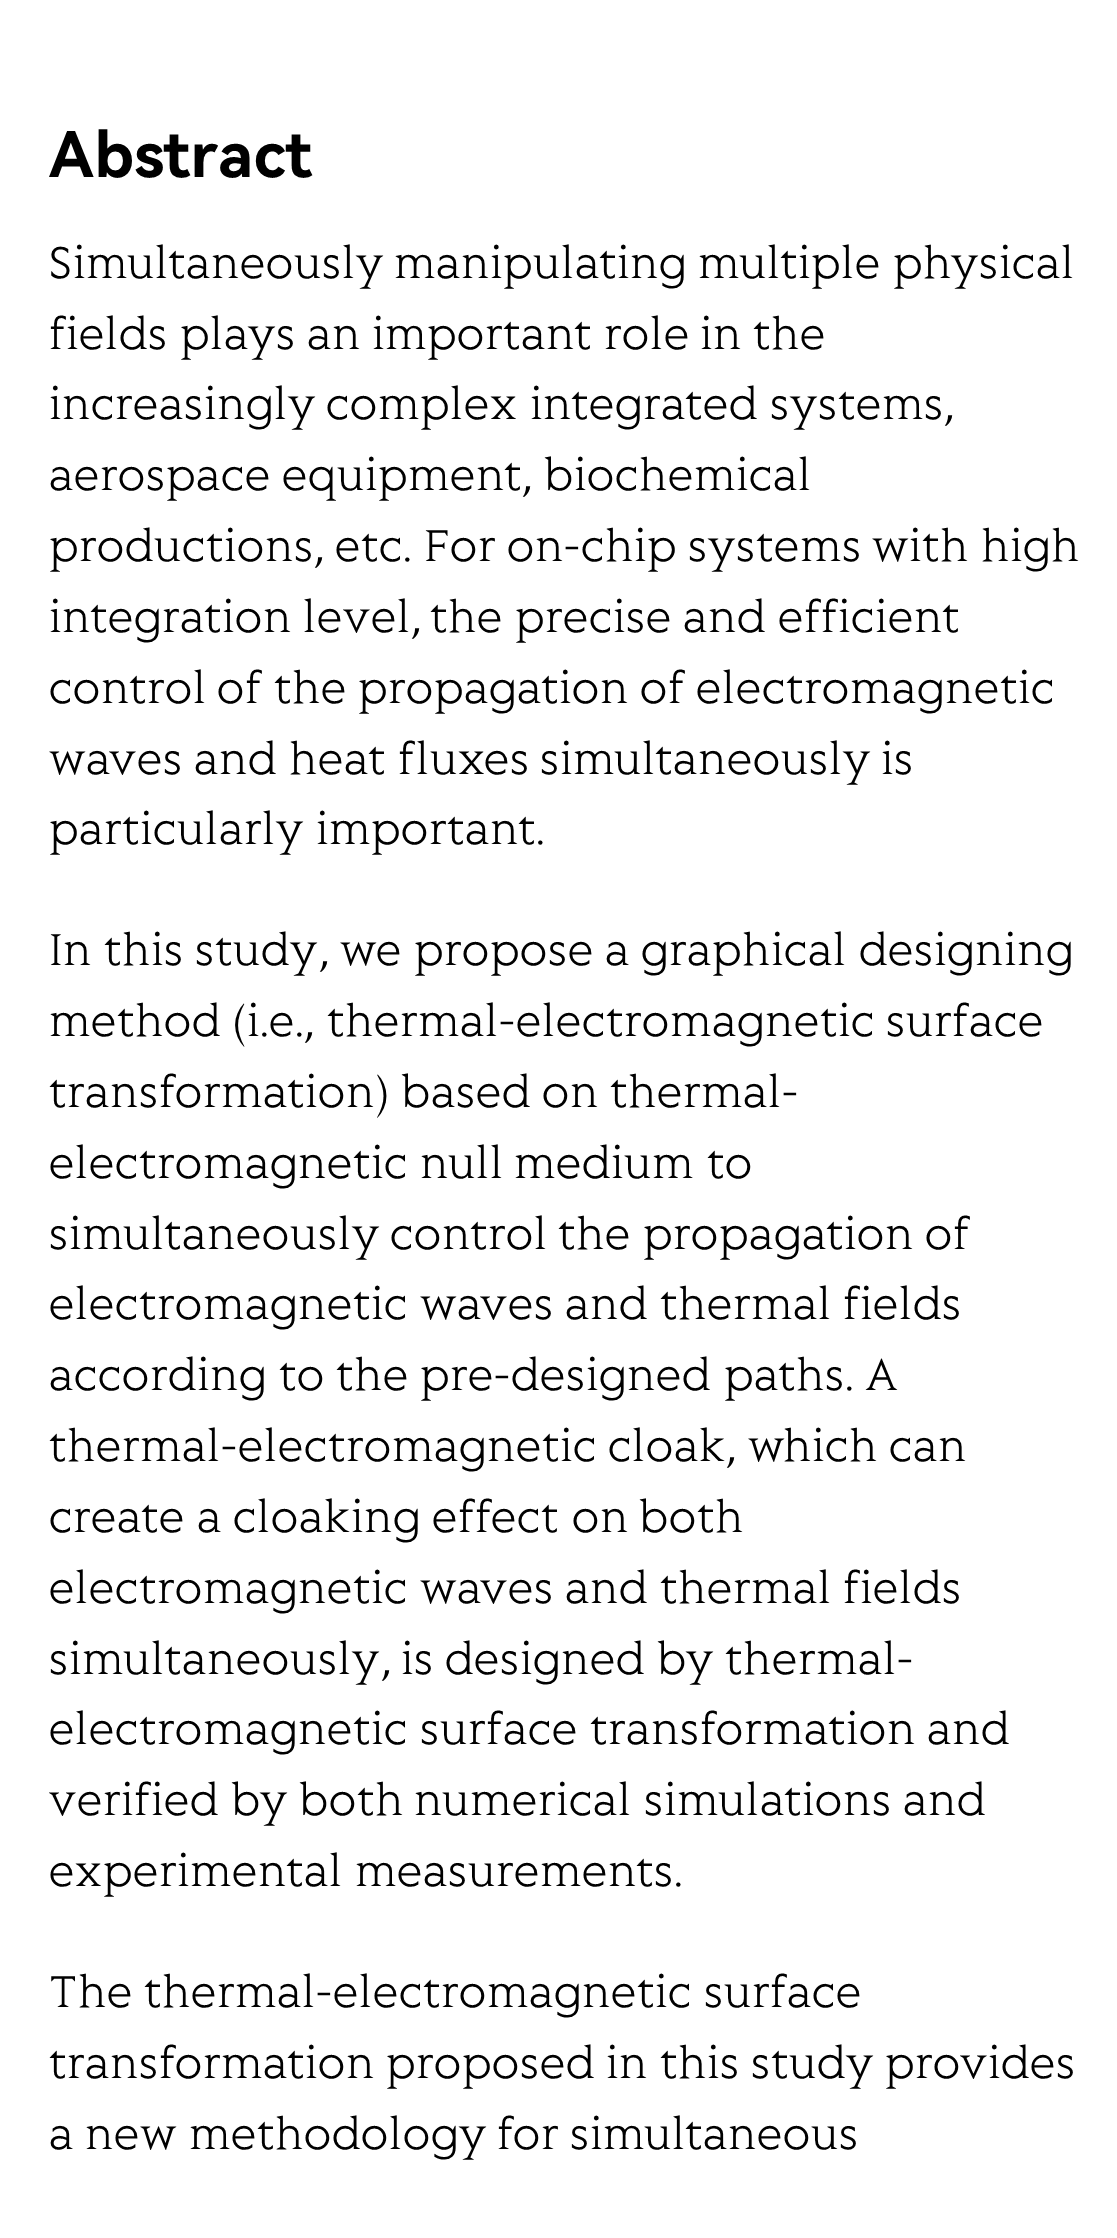 Simultaneously realizing thermal and electromagnetic cloaking by multi-physical null medium_2